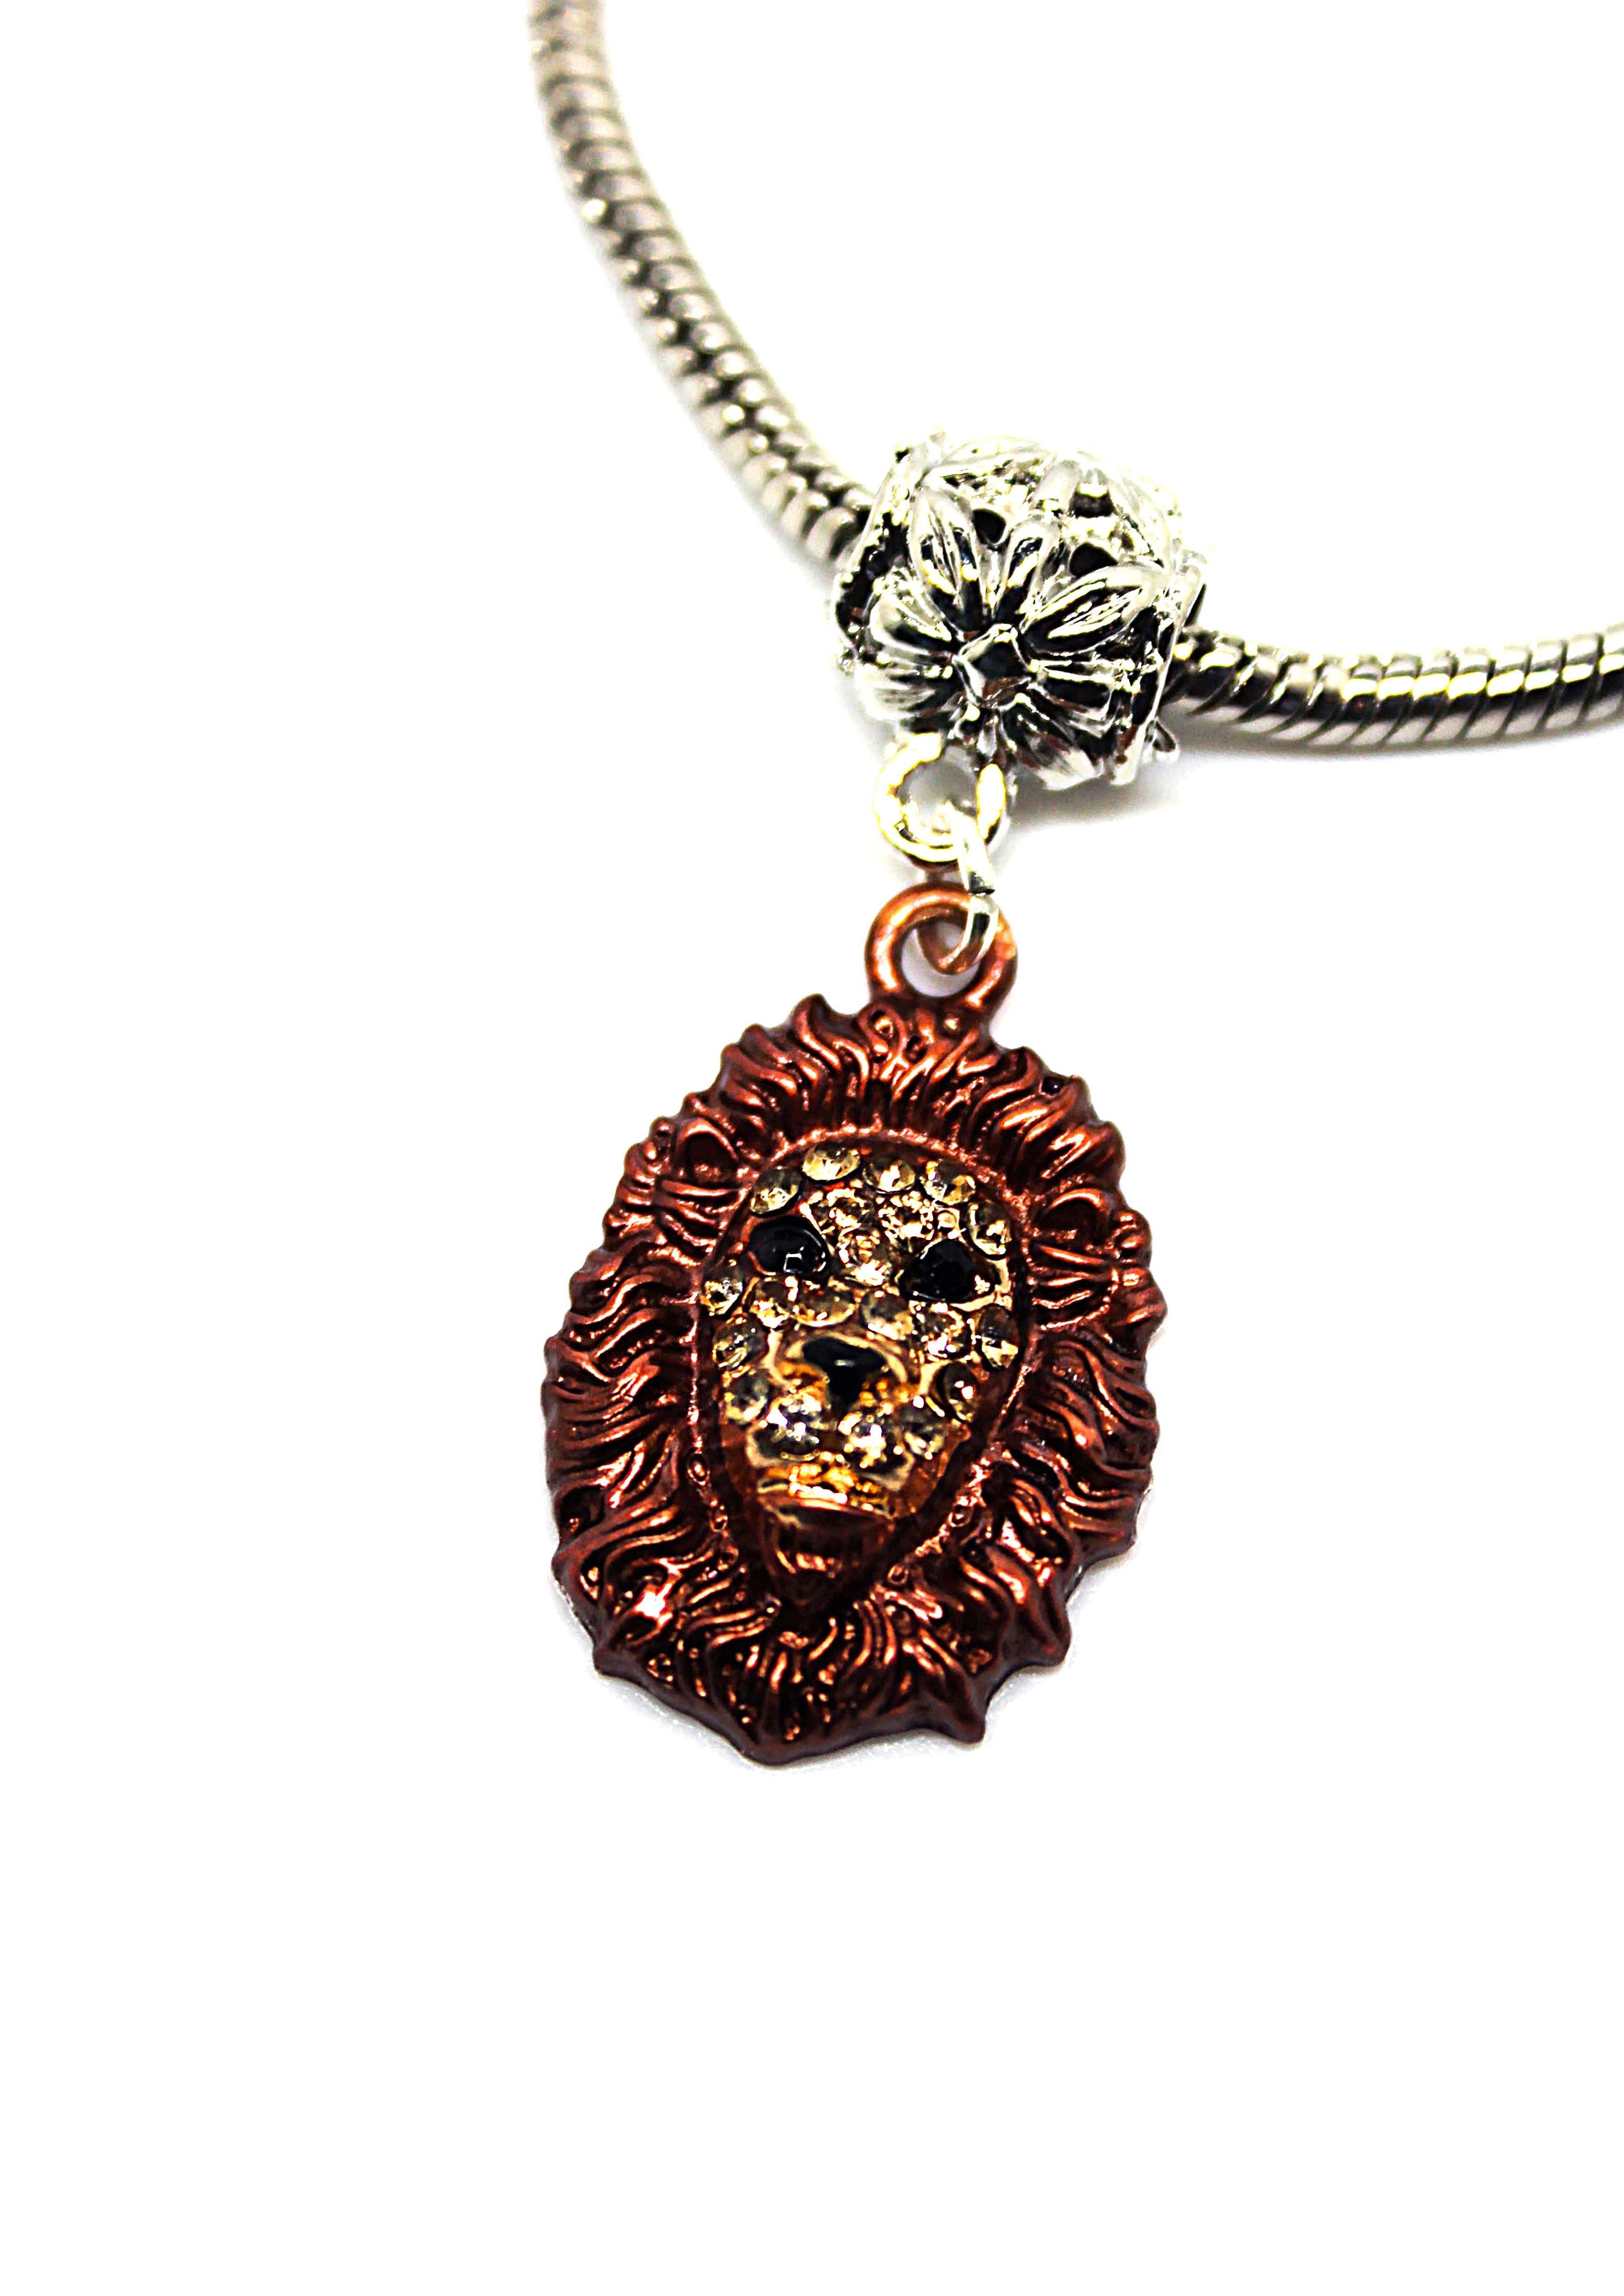 Lion Face Charm Bracelet - Wildtouch - Wildtouch